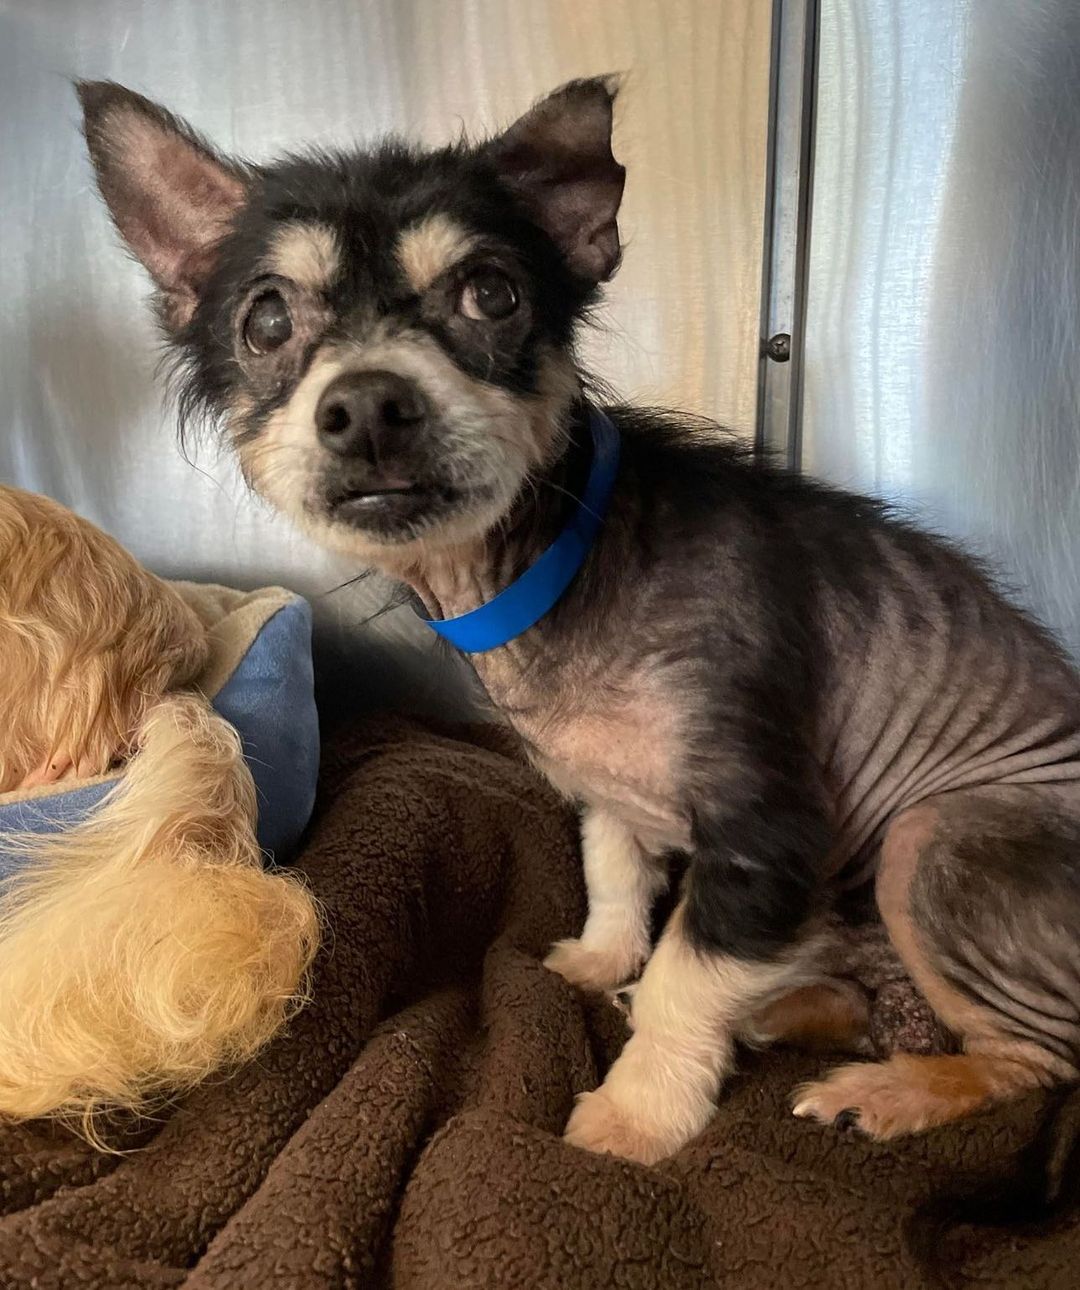 ‼️URGENT FOSTER NEEDED FOR 10 YO CHIHUAHUA MIX ‼️

We were just approached to rescue this older fella from the shelter. Chief is 10 years old and weighs 12 pounds.

Unfortunately he isn't doing well. He has heart worms and kennel cough. 💔 Poor guy was part of a neglect and hoarding case living in absolutely deplorable conditions. 😡 He has a phenomenal temperament for what he's been through and can be easily handled. We also know he's good with other dogs. 😊

Please apply to foster at twotailzrescue.org! 🐾

<a target='_blank' href='https://www.instagram.com/explore/tags/twotailzrescue/'>#twotailzrescue</a> <a target='_blank' href='https://www.instagram.com/explore/tags/weloverescuedogs/'>#weloverescuedogs</a> <a target='_blank' href='https://www.instagram.com/explore/tags/atlantarescue/'>#atlantarescue</a> <a target='_blank' href='https://www.instagram.com/explore/tags/fosterme/'>#fosterme</a> <a target='_blank' href='https://www.instagram.com/explore/tags/fosteringsaveslives/'>#fosteringsaveslives</a> <a target='_blank' href='https://www.instagram.com/explore/tags/atlantafoster/'>#atlantafoster</a> <a target='_blank' href='https://www.instagram.com/explore/tags/chihuahuas_of_instagram/'>#chihuahuas_of_instagram</a>ö